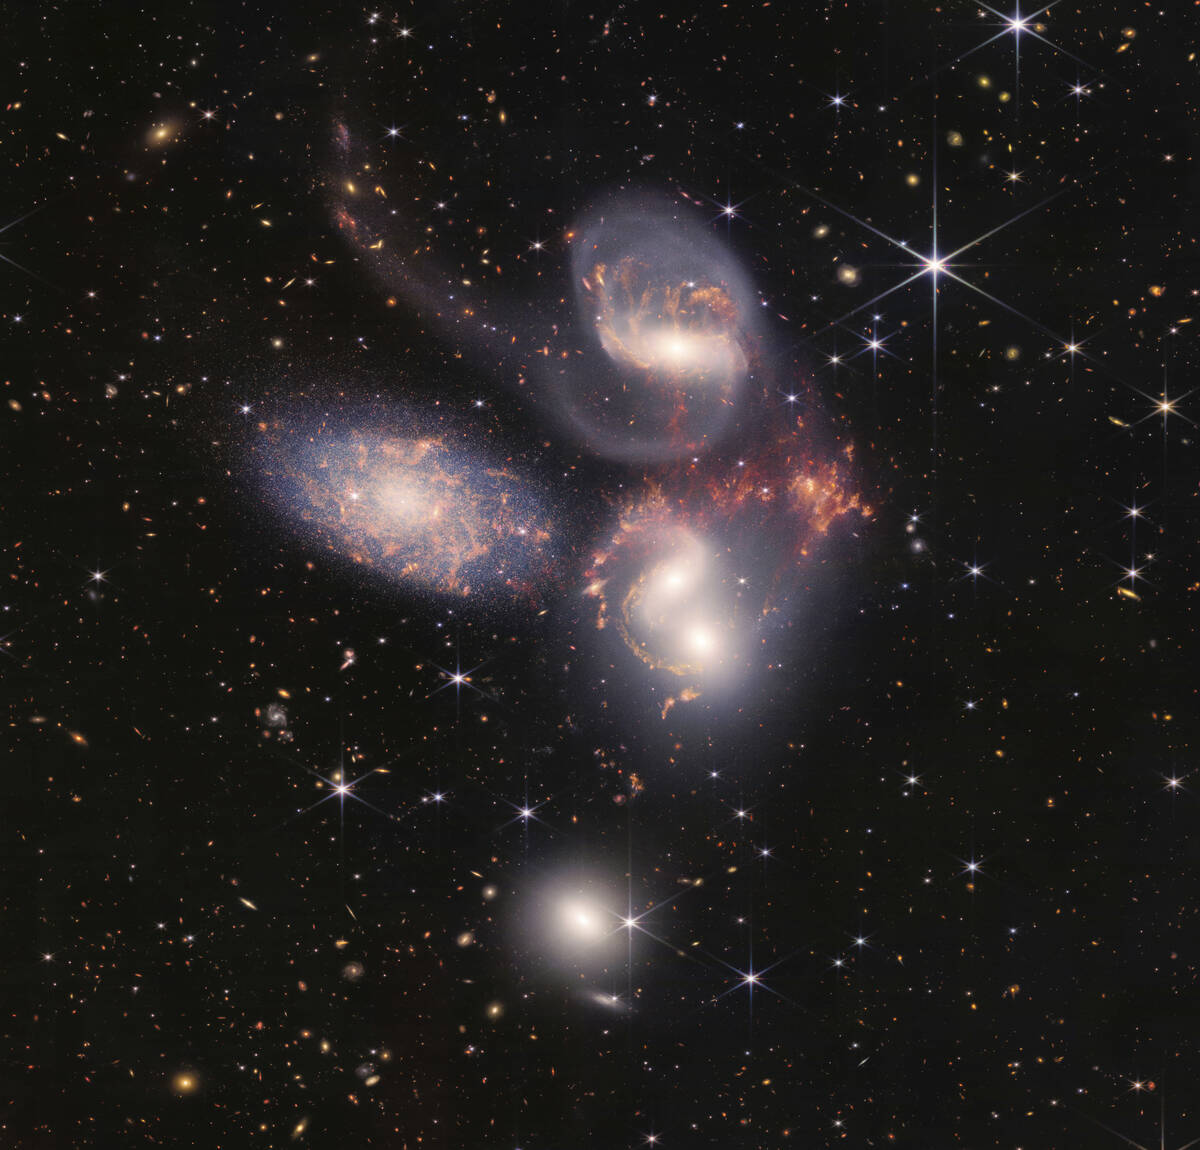 This image provided by NASA on Tuesday, July 12, 2022, shows Stephan's Quintet, a visual groupi ...